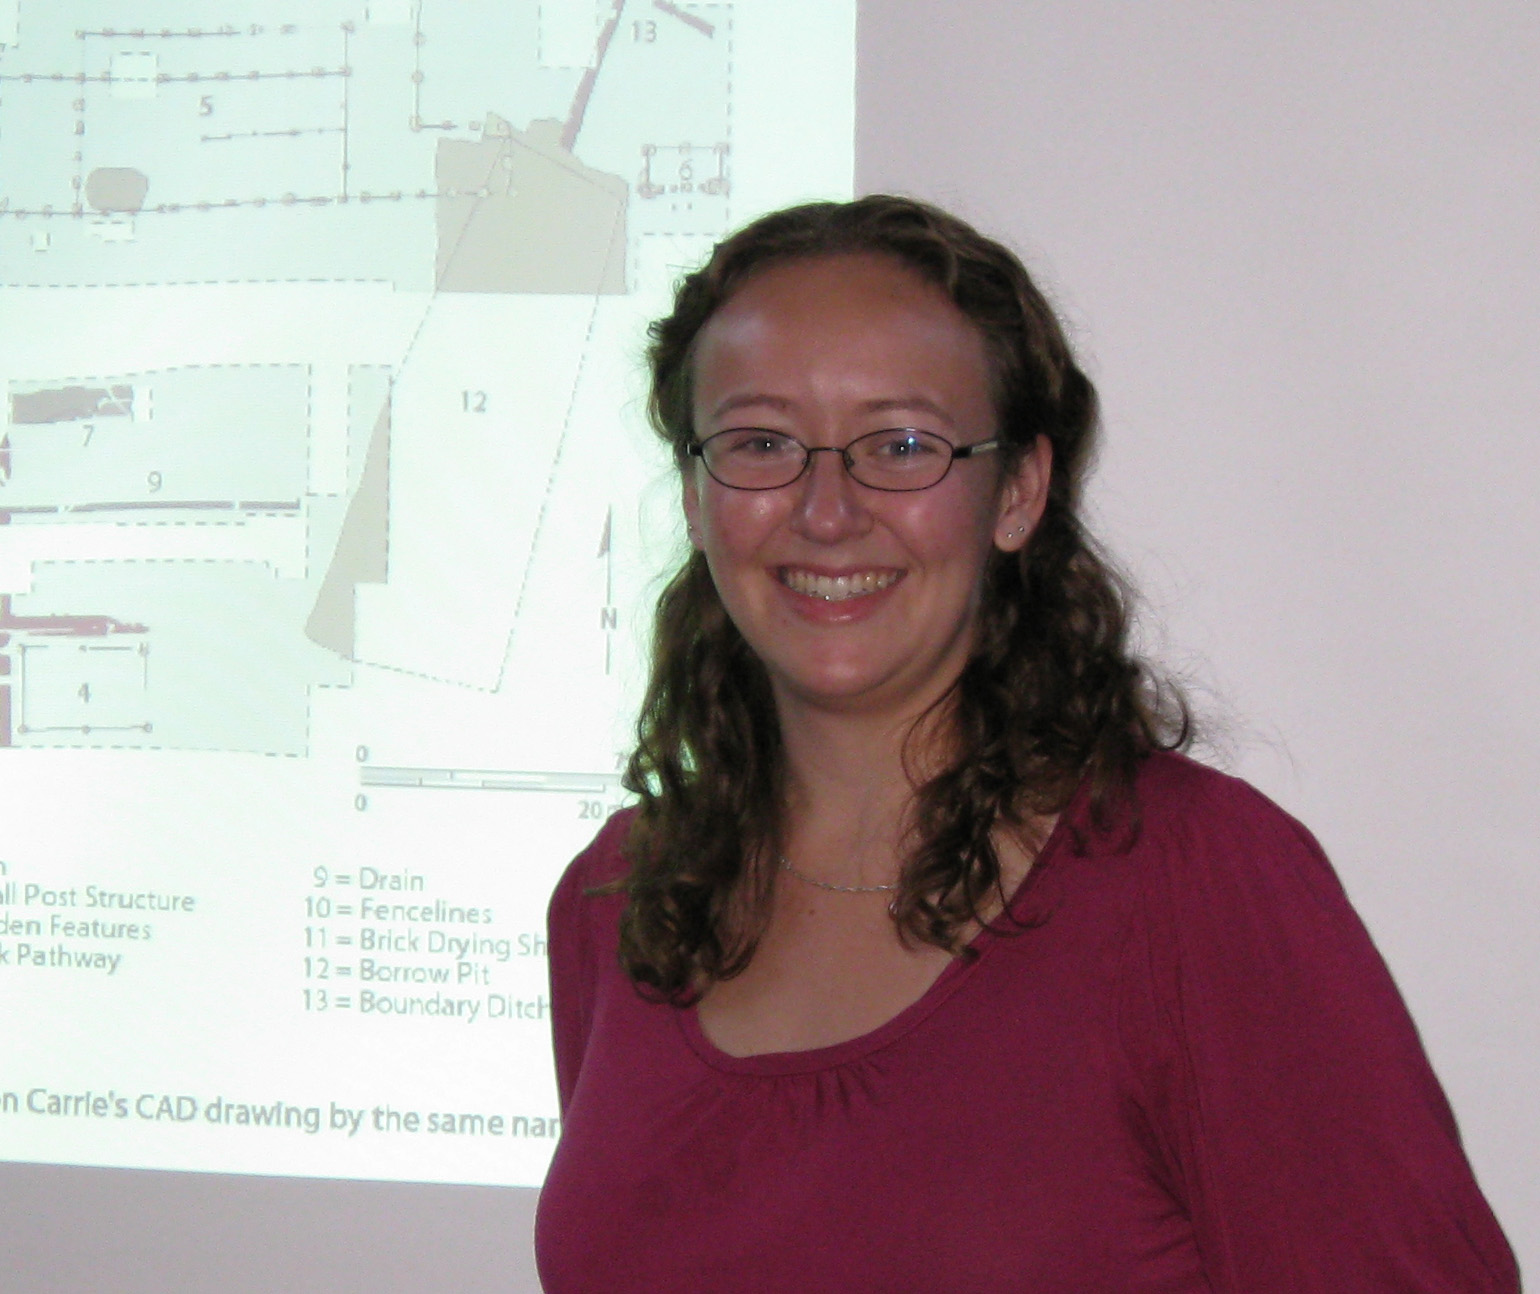 Elizabeth Cook, recipient of the 2009-10 Distinguished Thesis Award in the Humanities, presented her research at the fall 2010 meeting of the Graduate Studies Advisory Board.